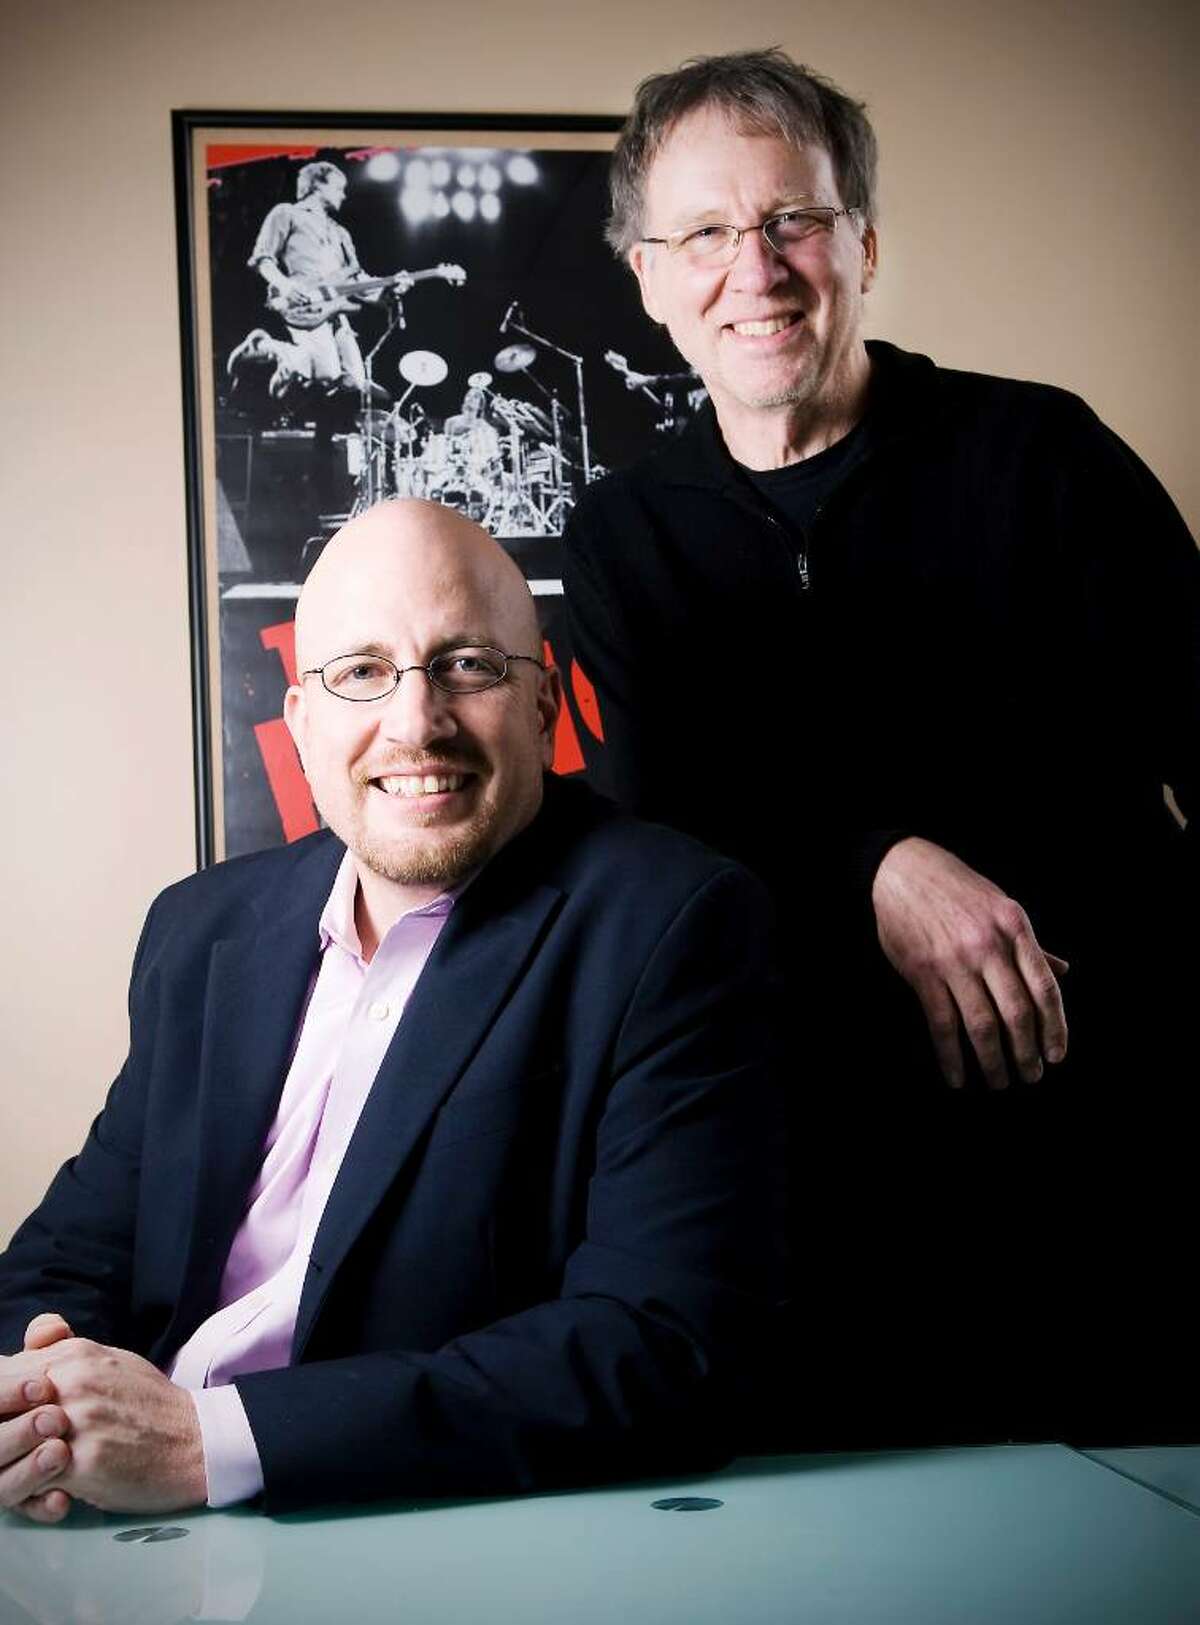 Bob Kernen and Tom Sharrard, Co-founders of GrokMusic, a free music website that specializes in helping you "Find the Music You're Missing" in their Norwalk, Conn. office on Tuesday, Jan. 26, 2010.